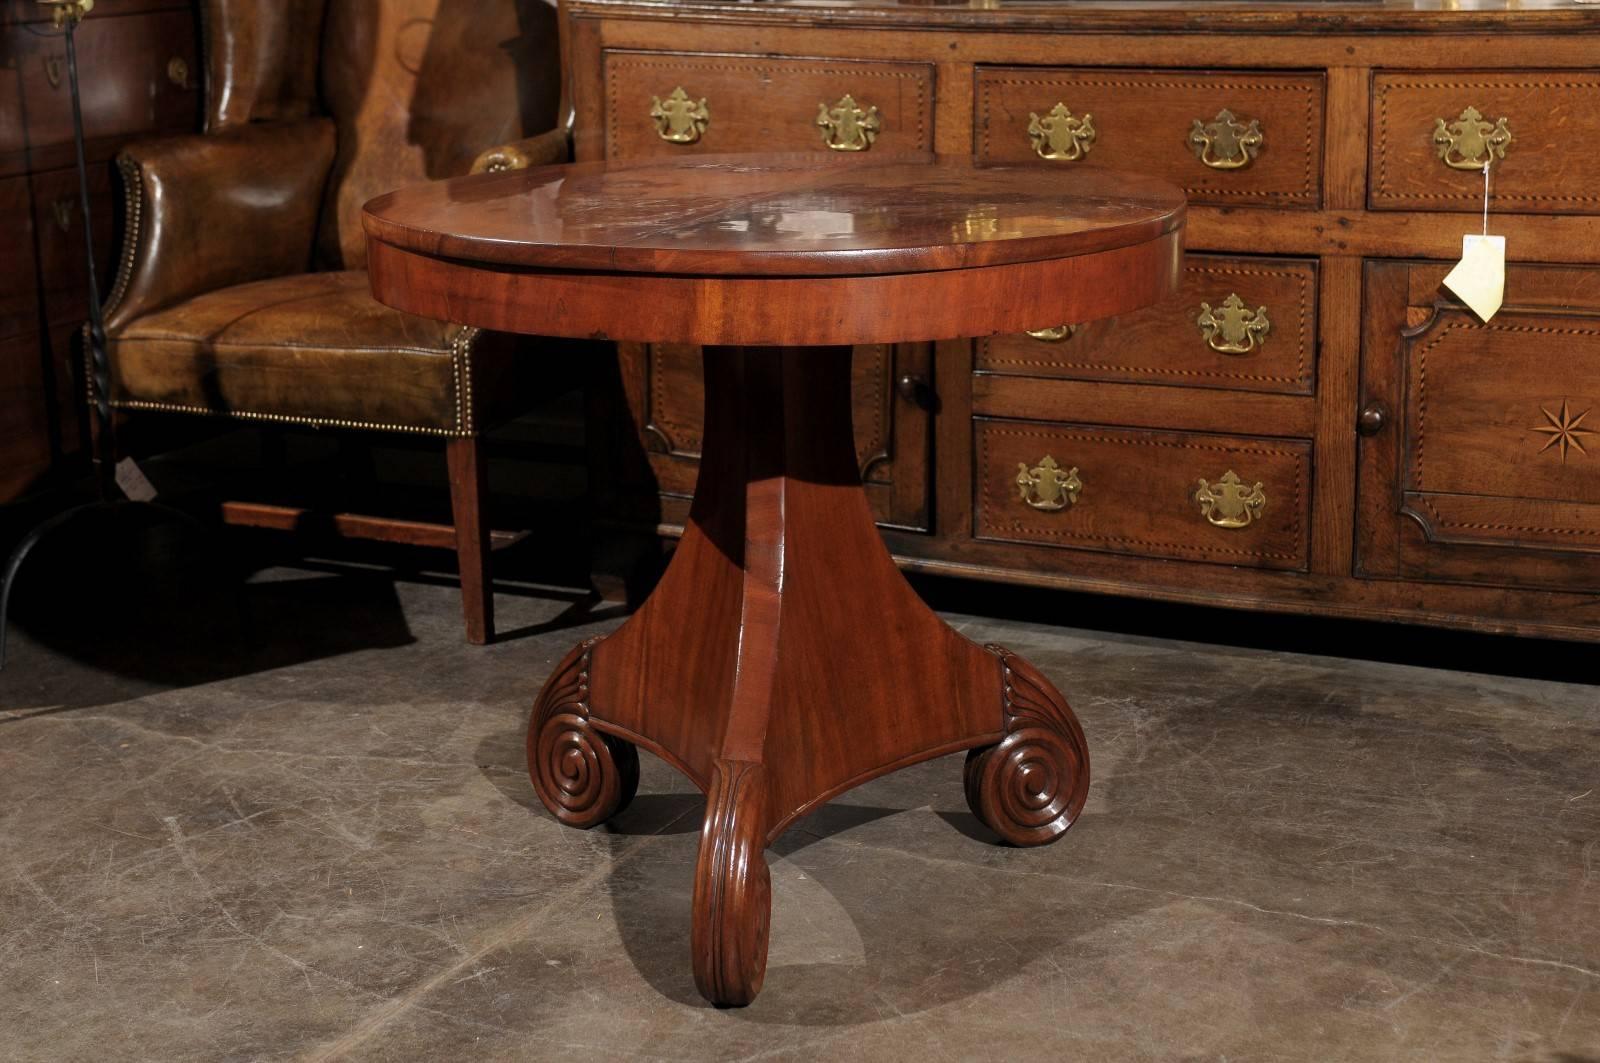 This Austrian late 19th century Biedermeier table features a top made of two half moons, a simple apron, all over an exquisite pedestal base. The eye is immediately drawn to this elegant tripod base, made of volutes with stylized acanthus leaves.